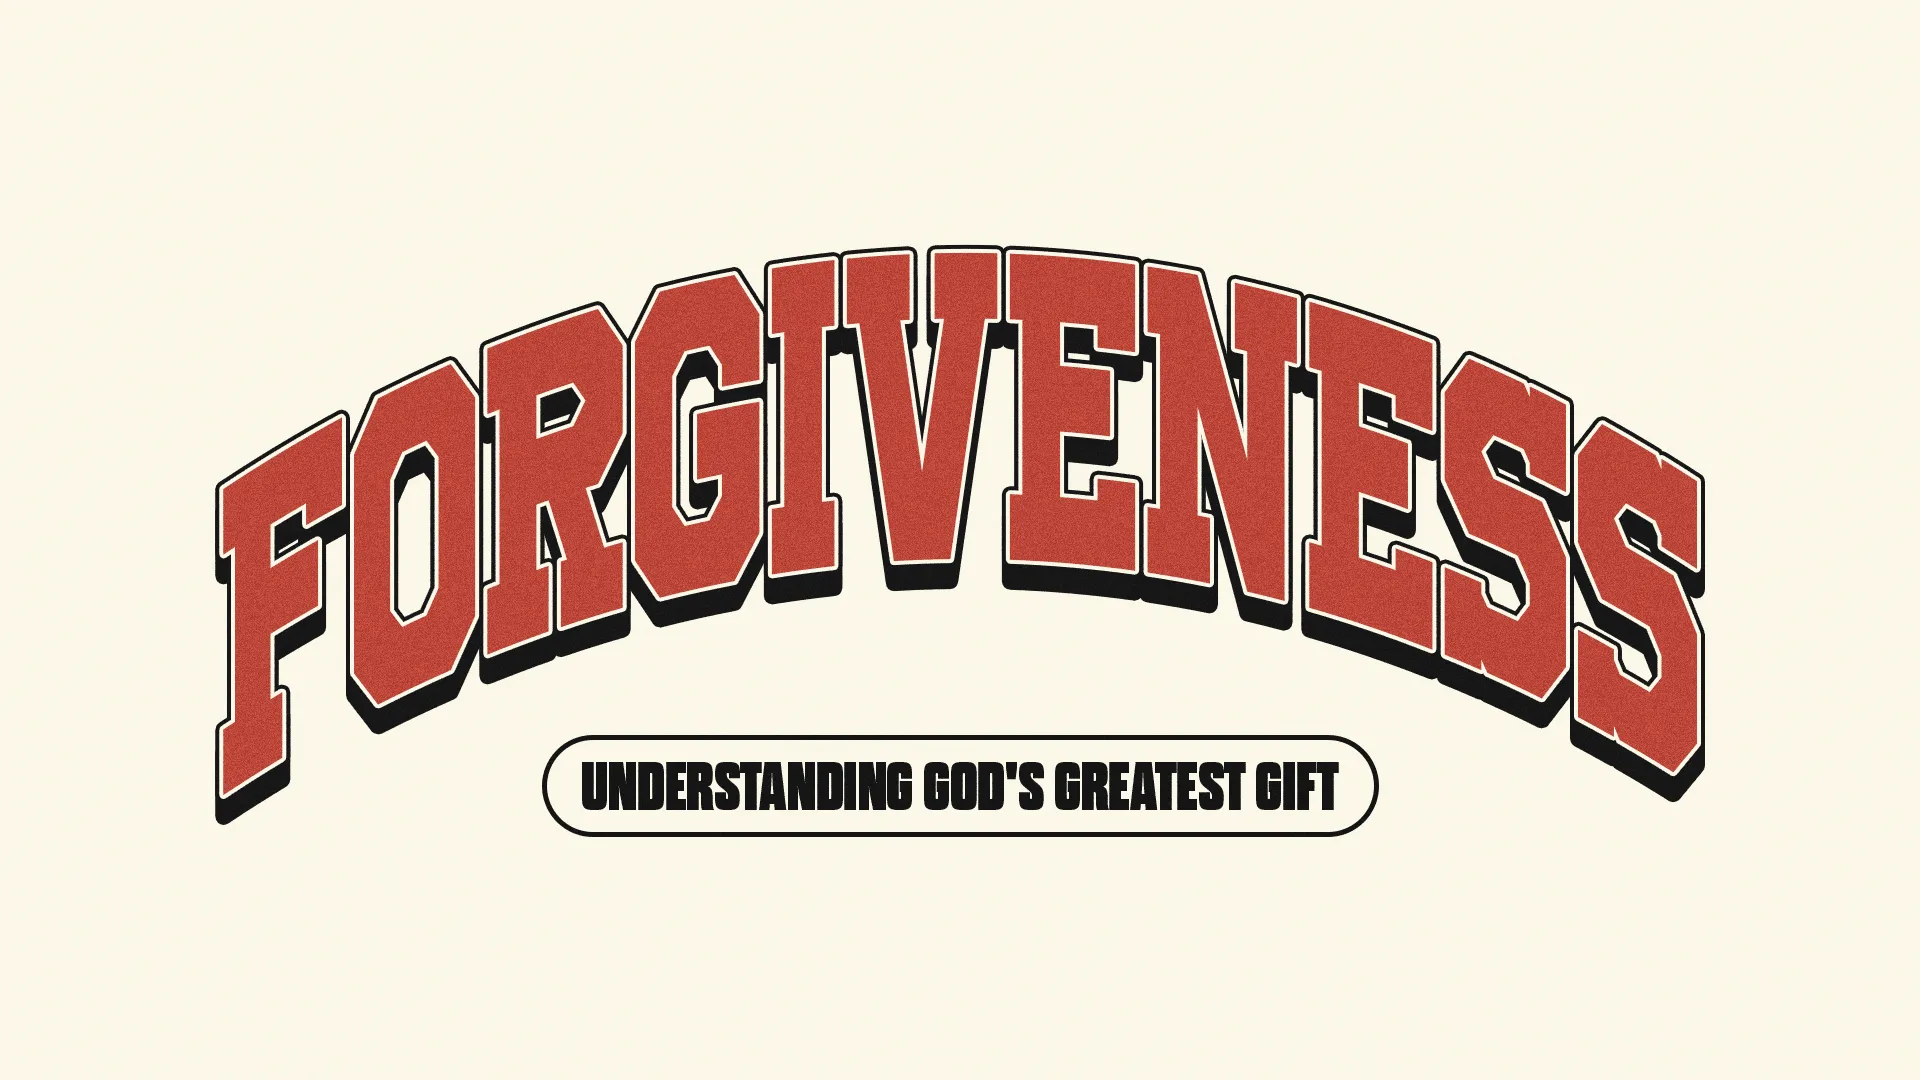 Infuse Your Church'S Teachings With This 'Forgiveness' Graphic, Which Serves As A Compelling Visual Aid To Explore And Understand The Transformative Power Of God'S Grace And Mercy.